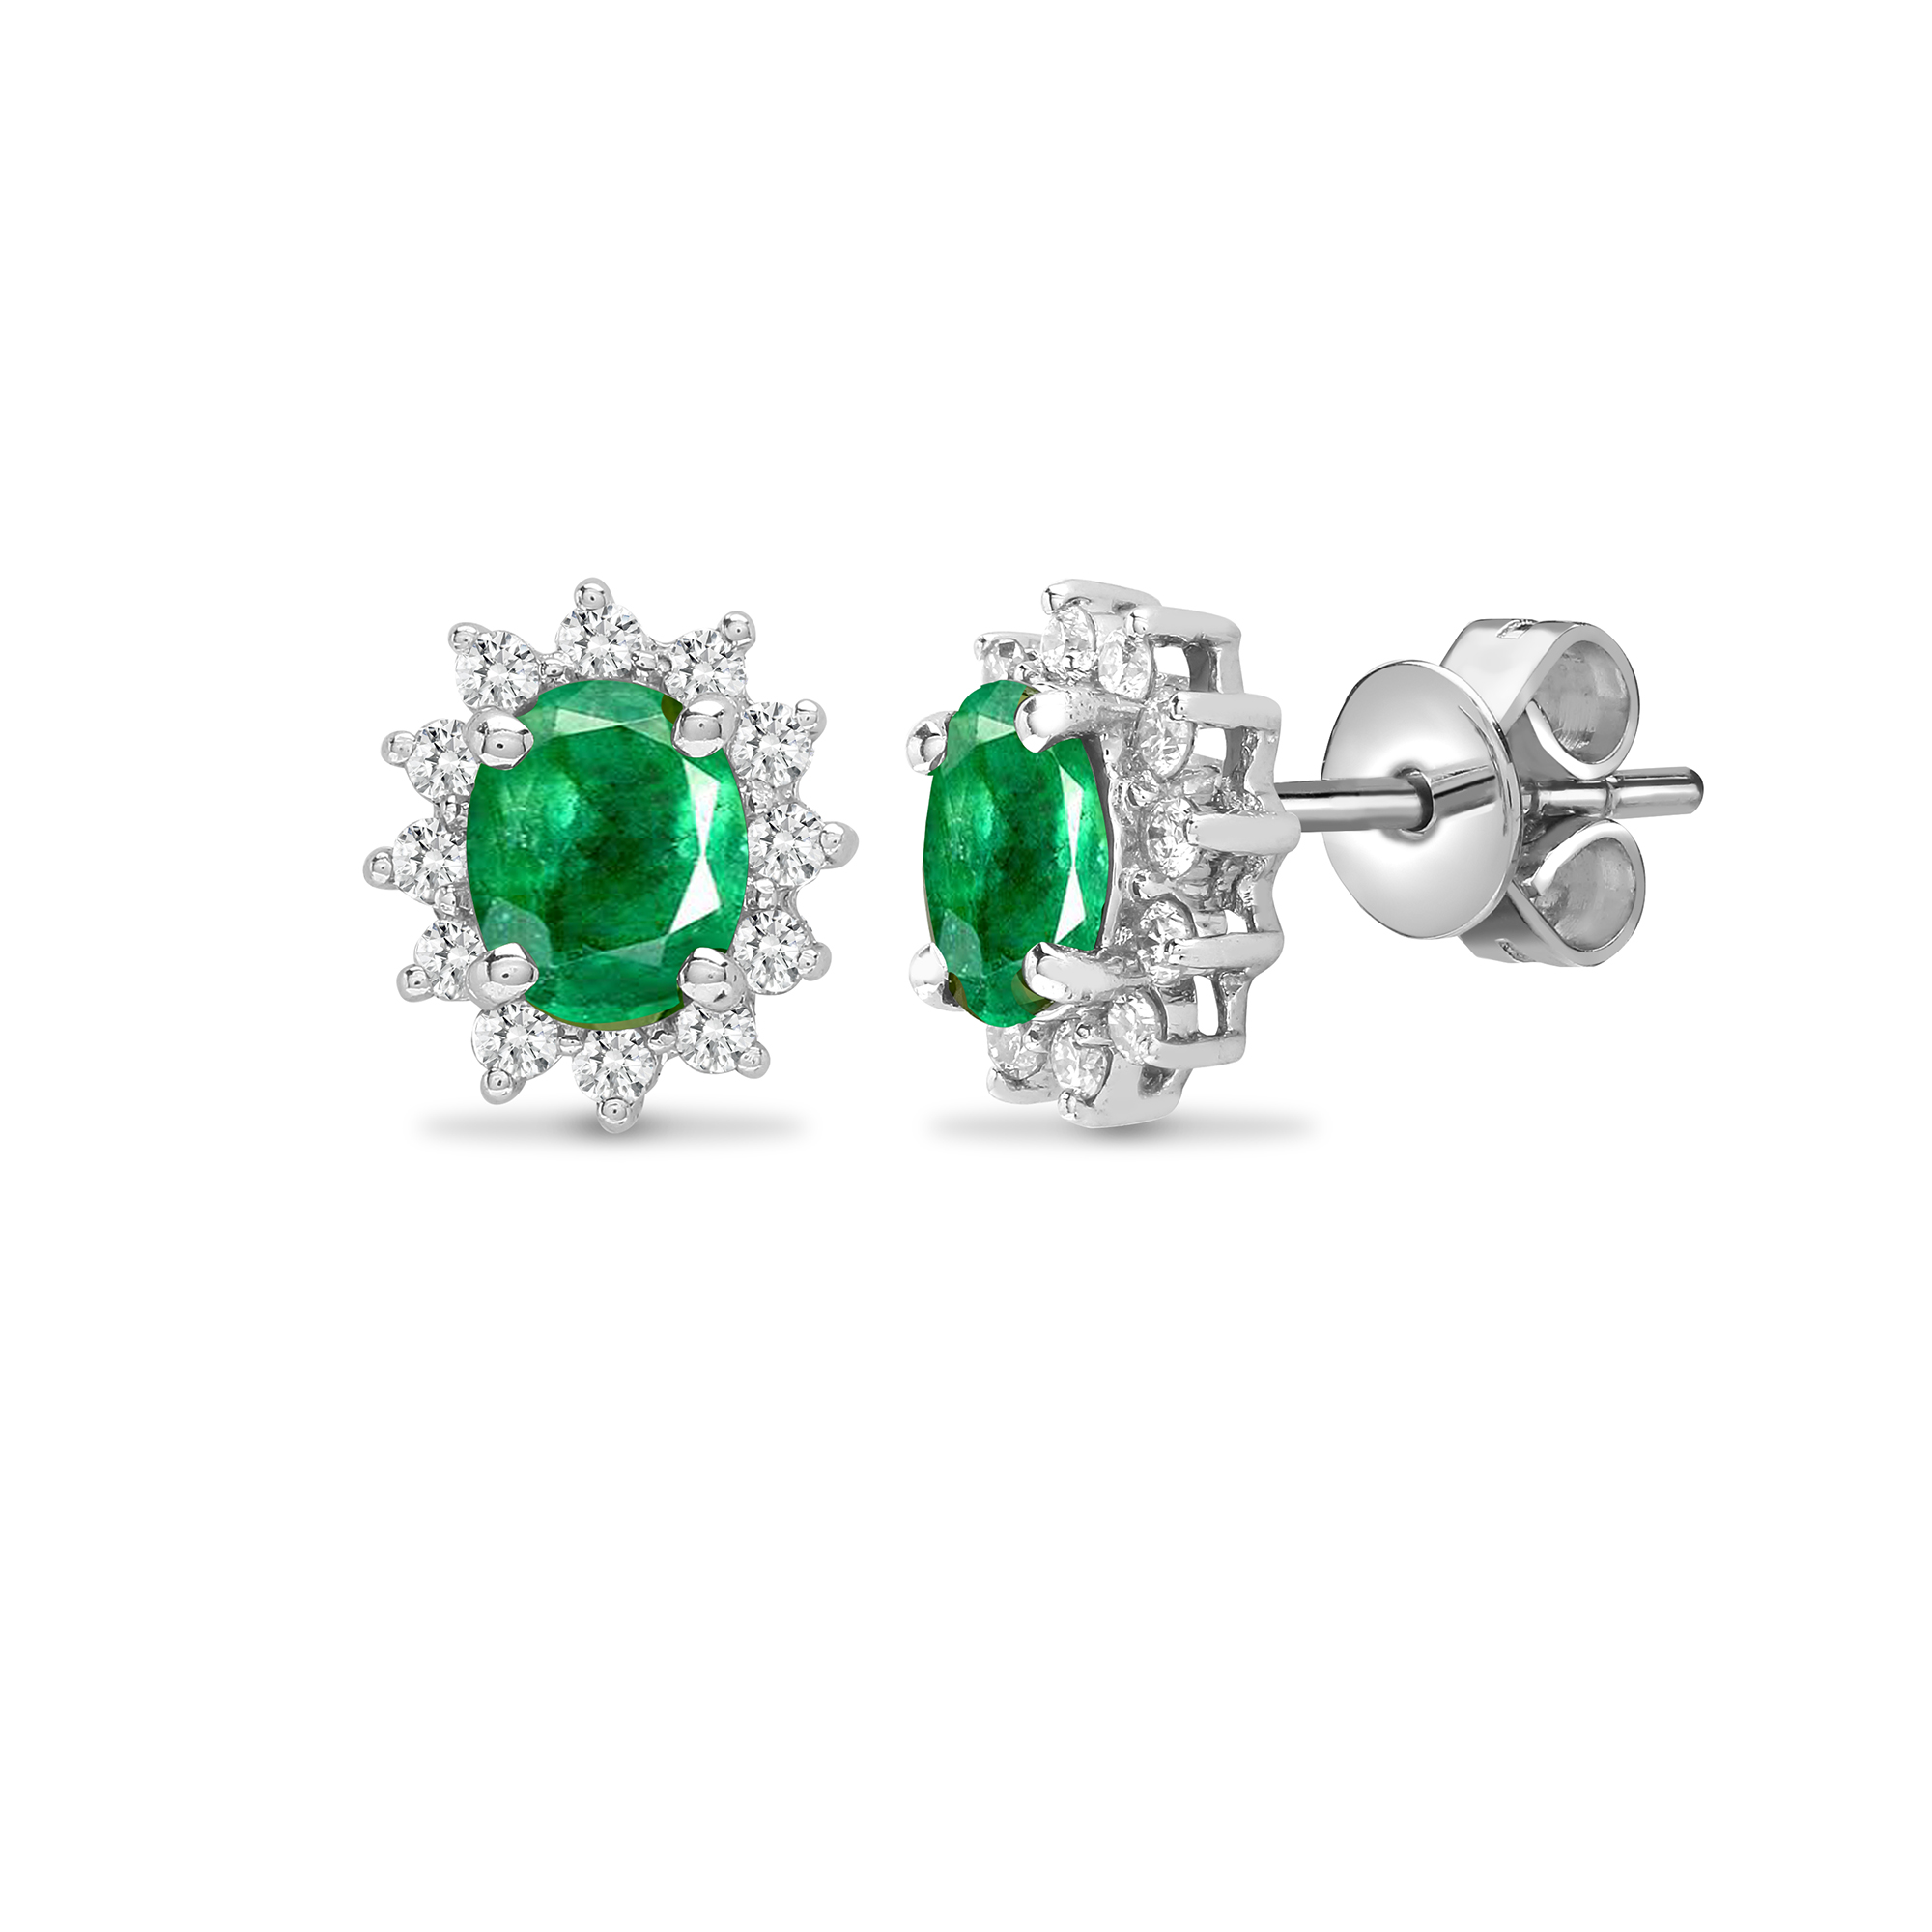 0.85 Carat Oval Cut Emerald Stone And Natural Round Cut Diamonds Earrings